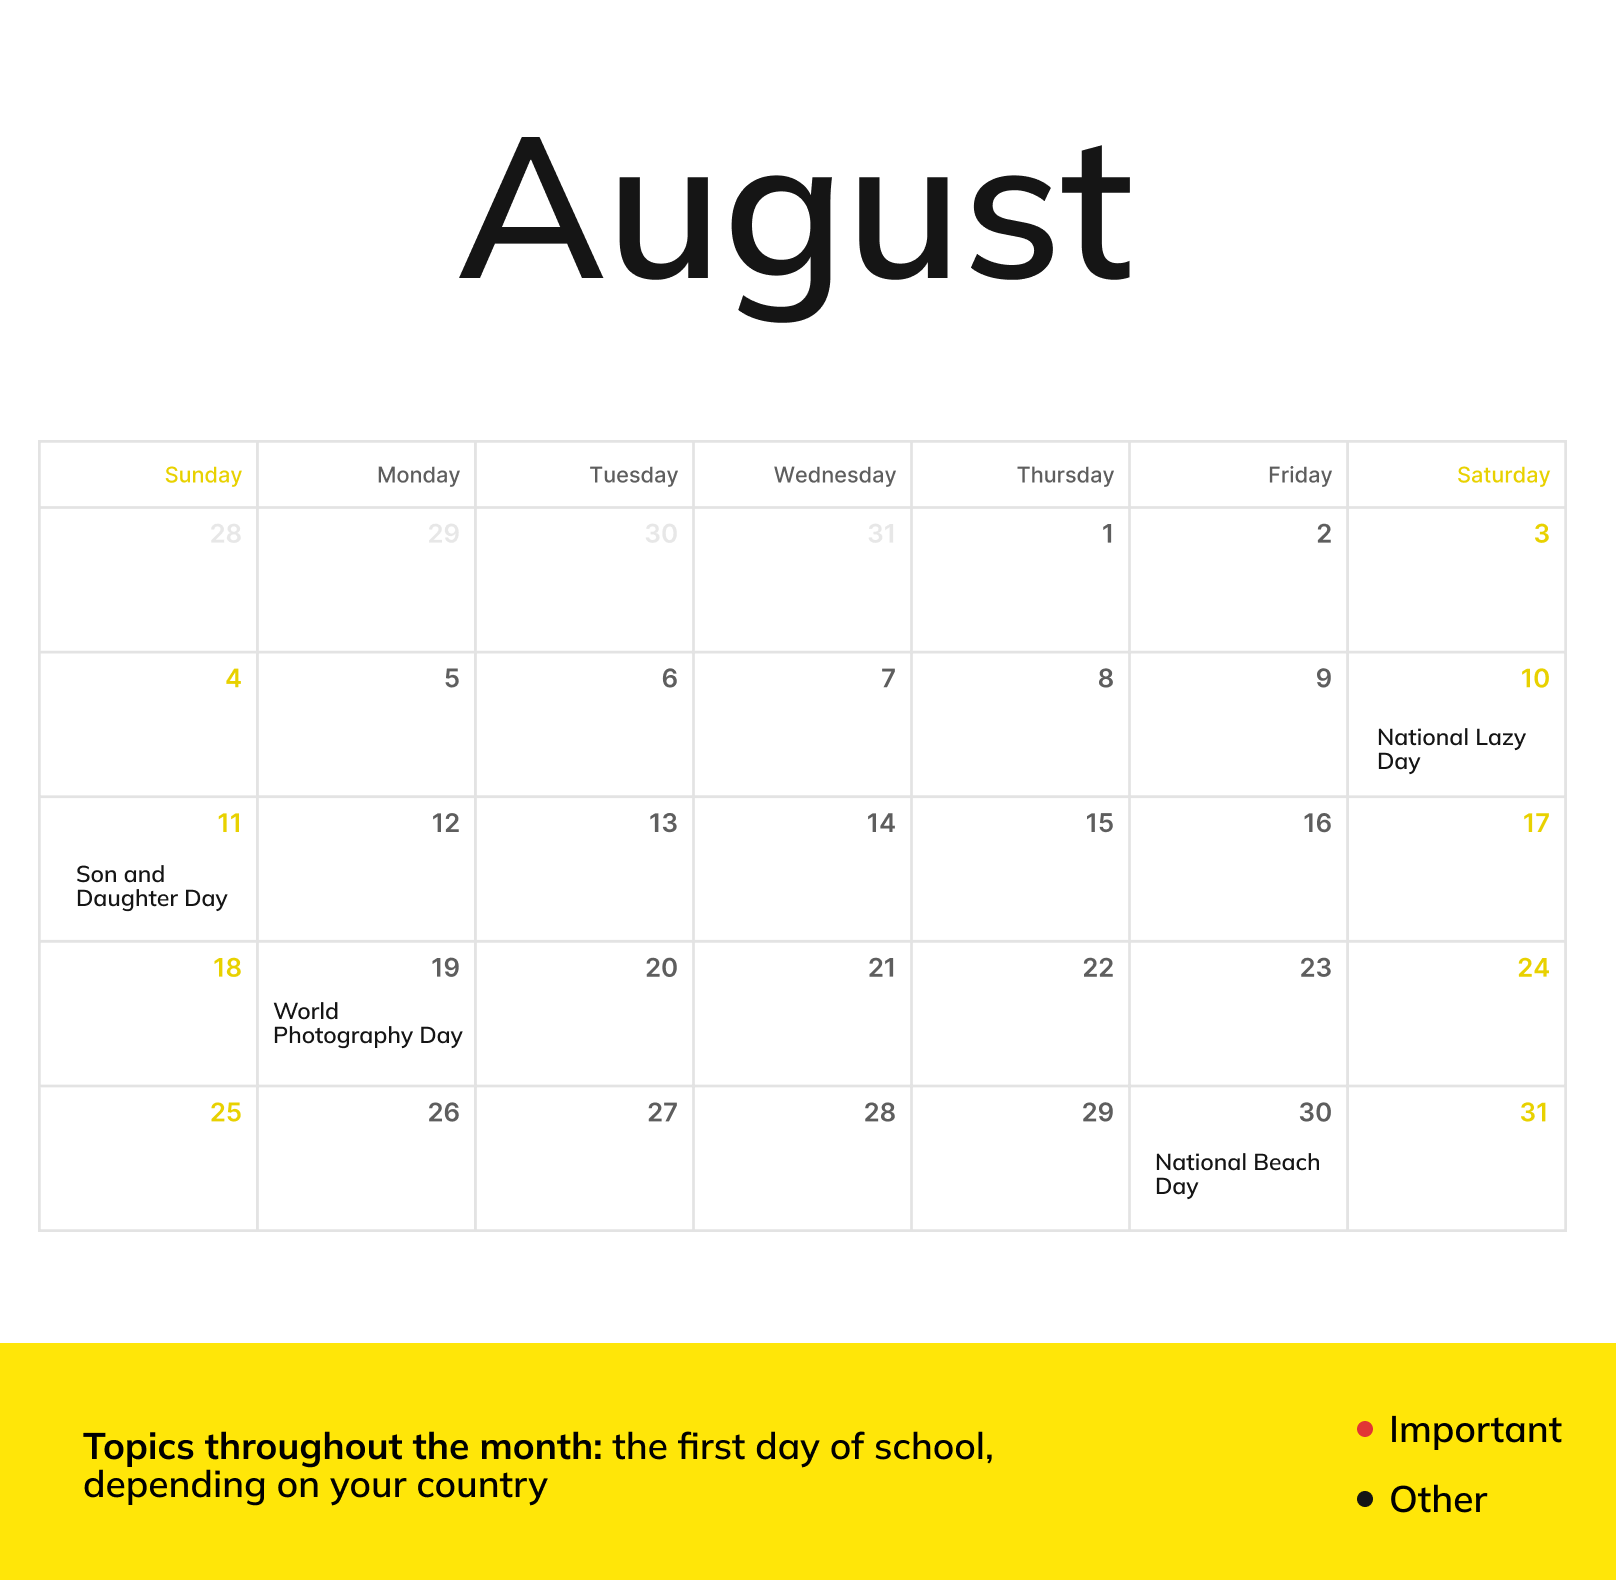 An August monthly calendar with holidays and topics throughout the month being the first day of school, depending on your country